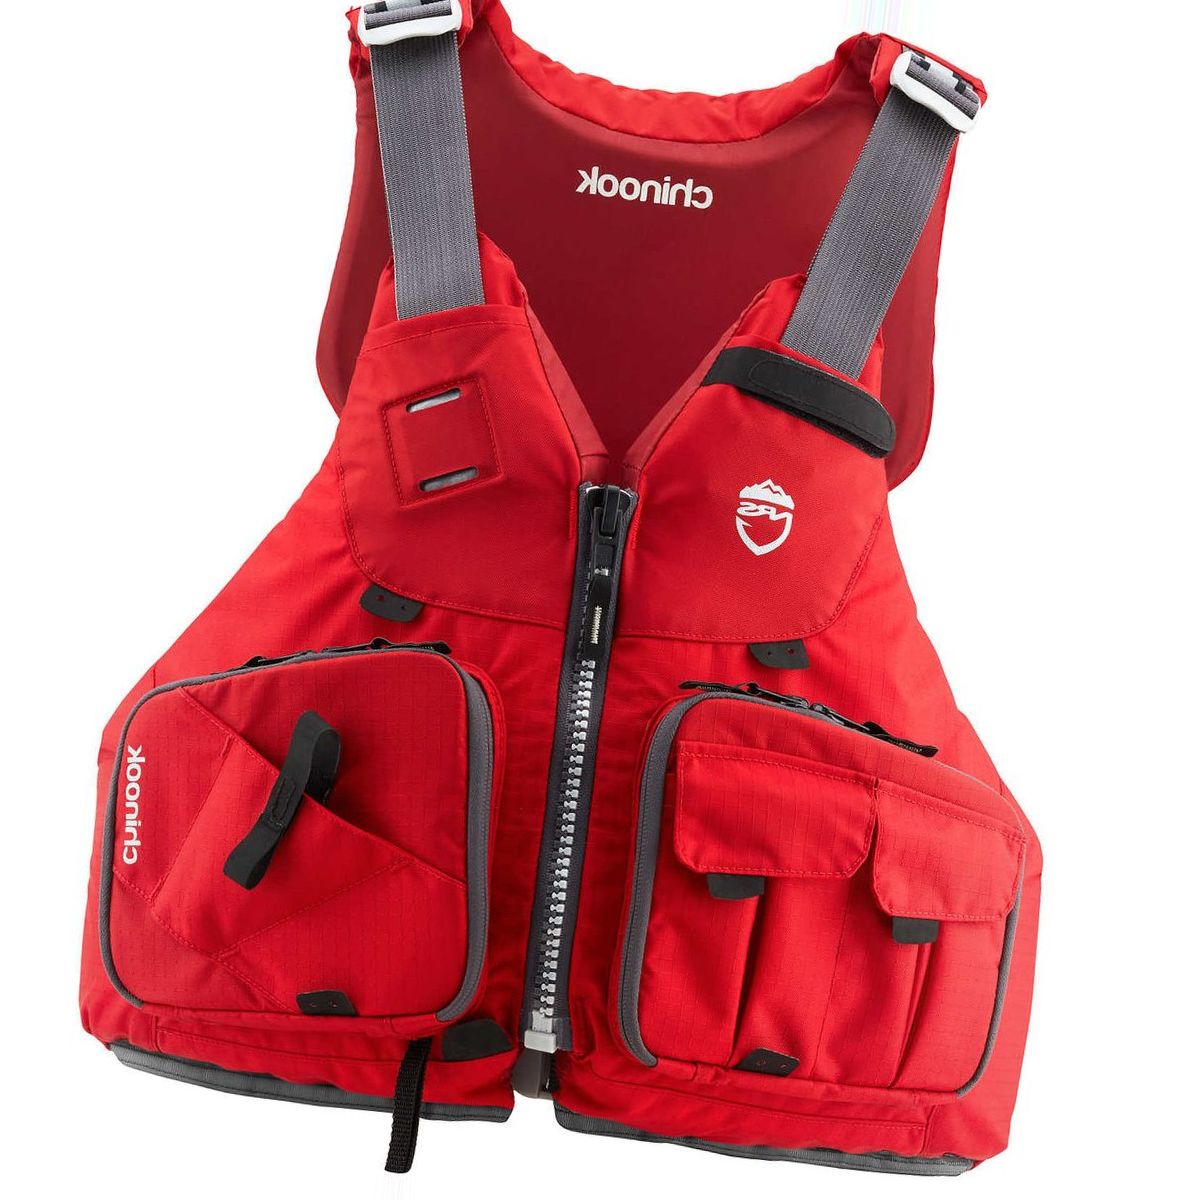 NRS Chinook Personal Flotation Device - Men's